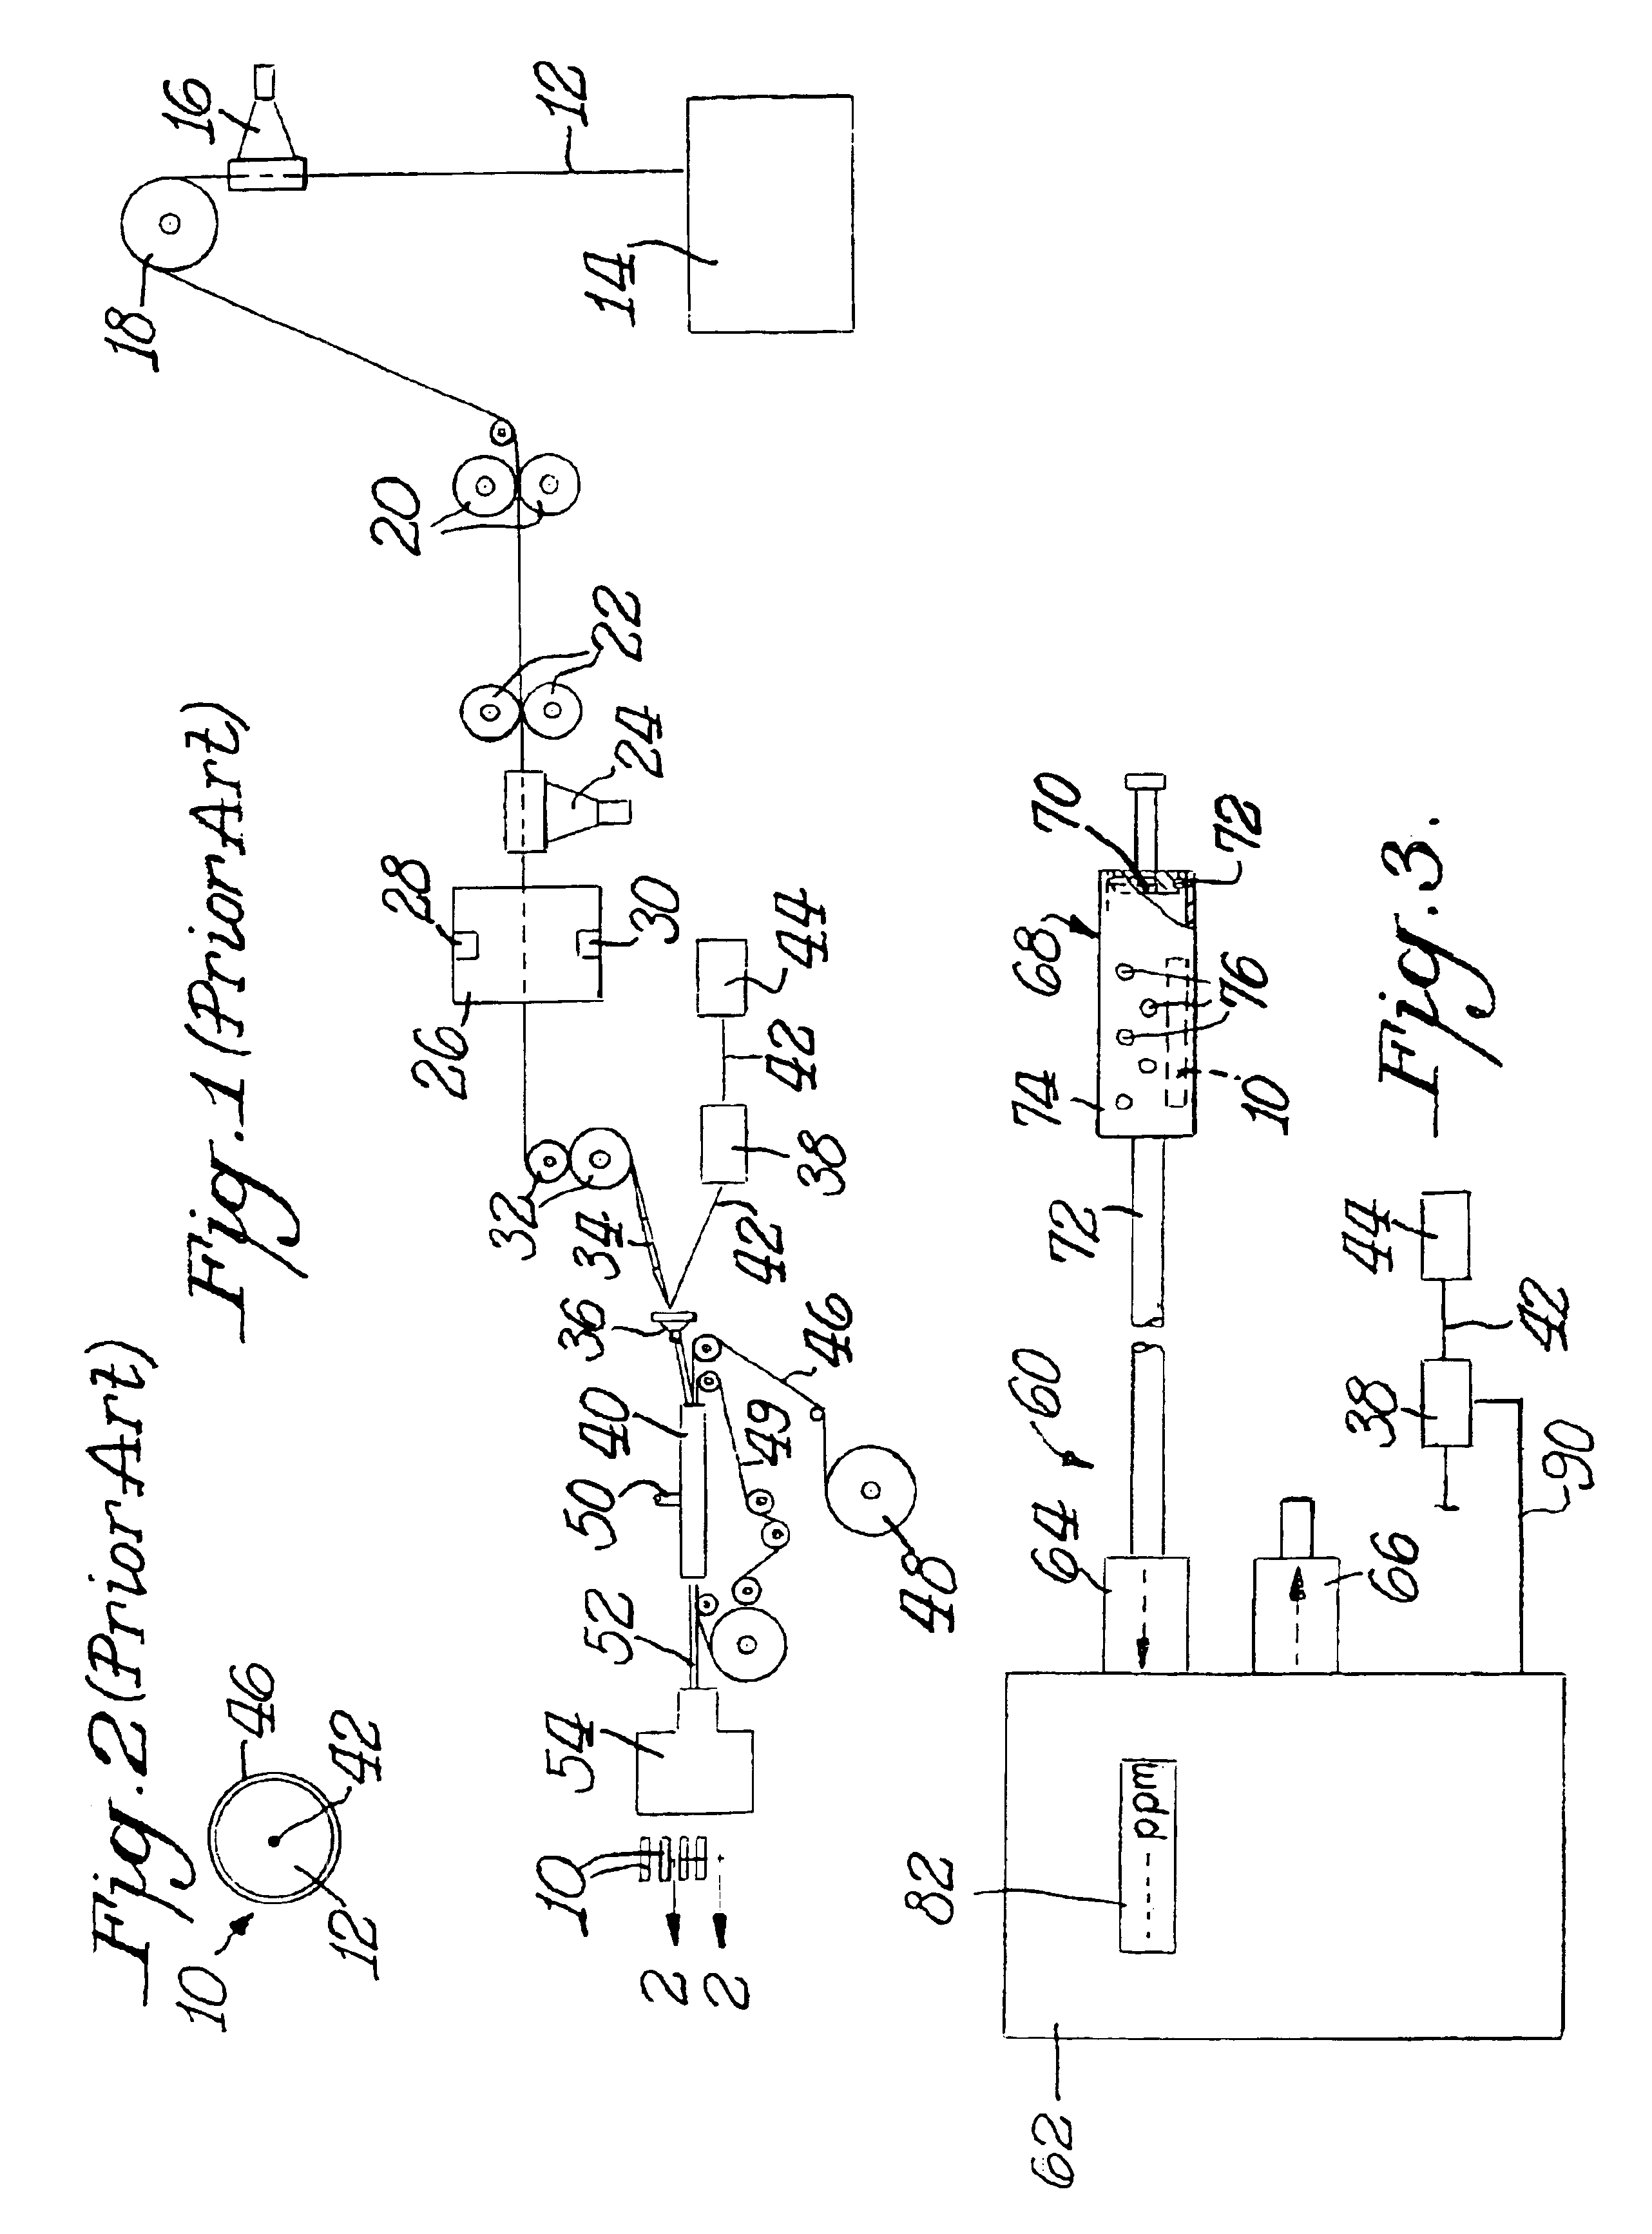 Flavor monitoring system and method